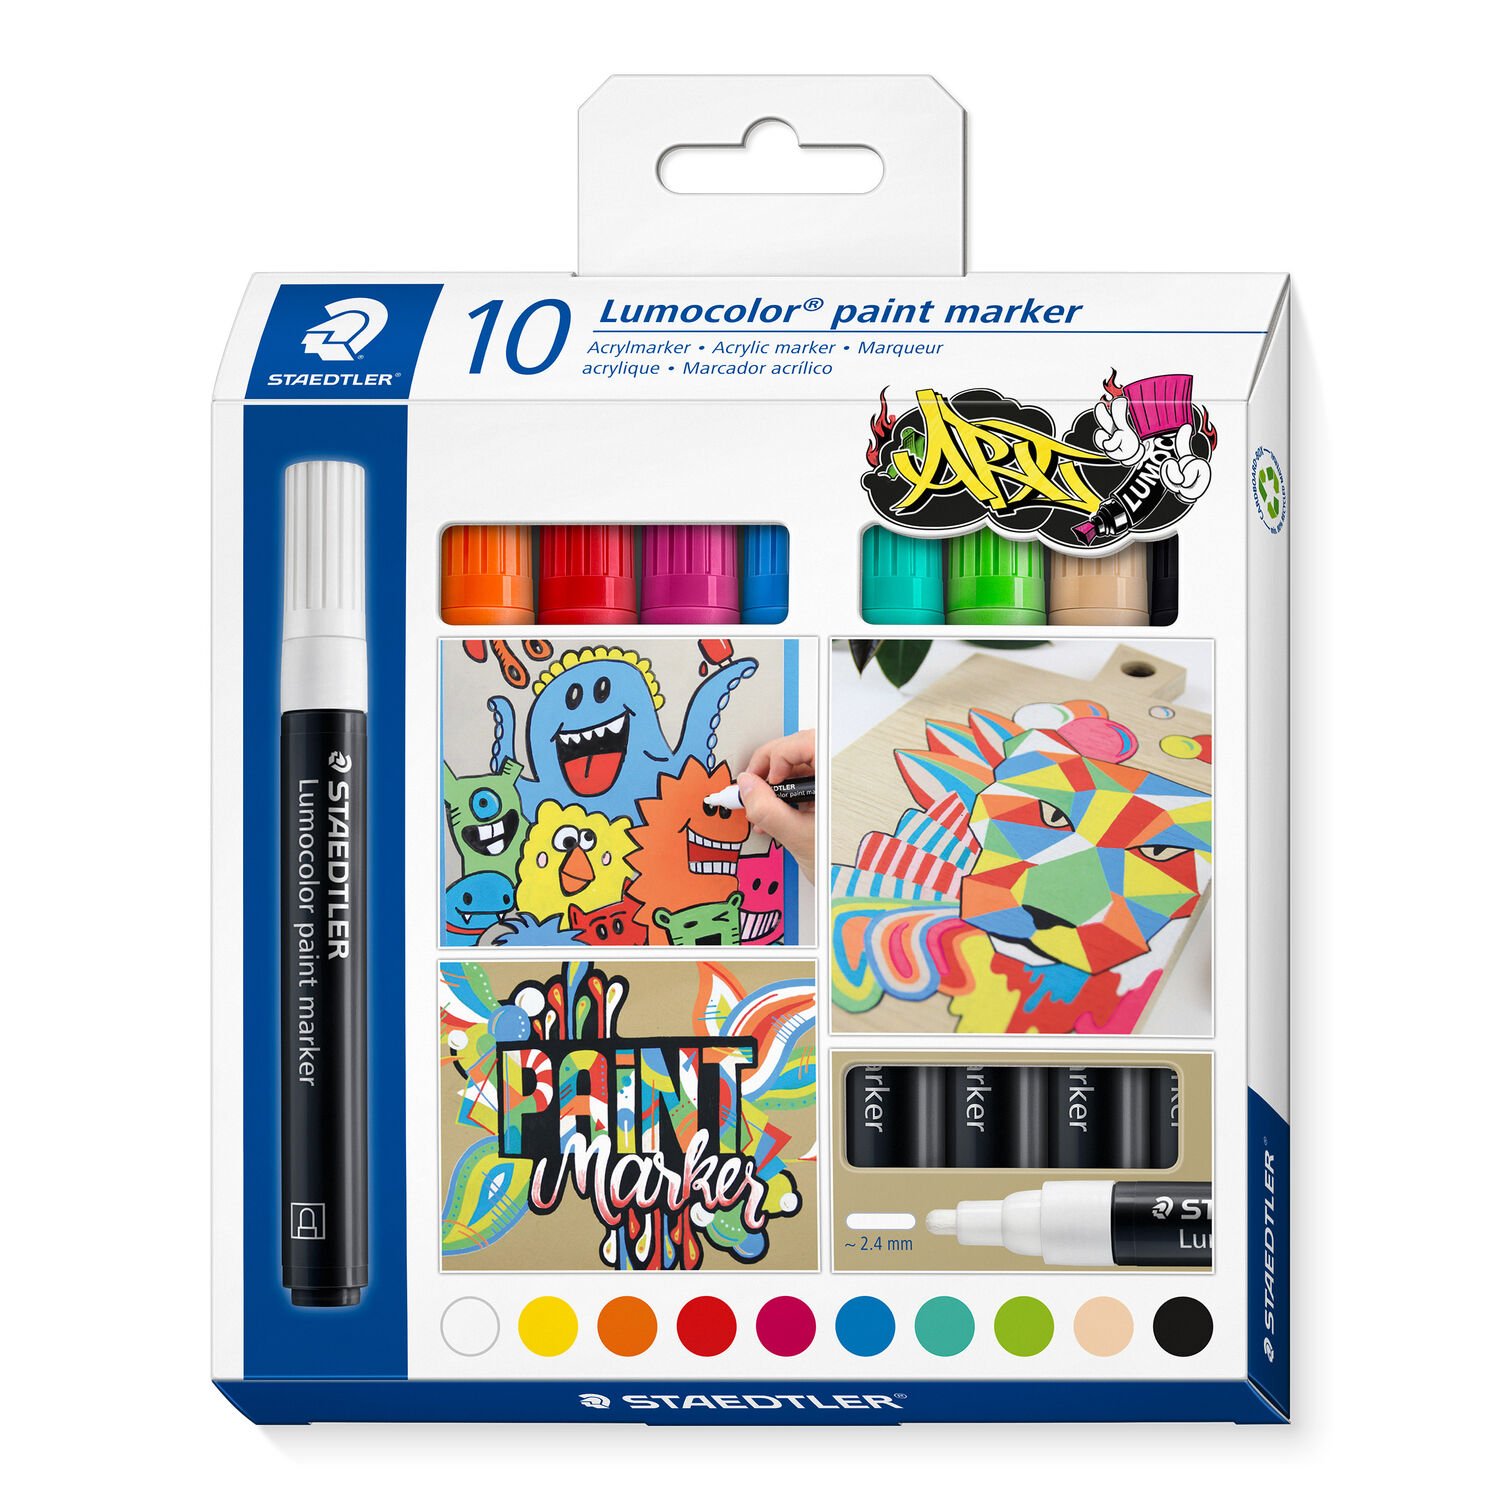 Cardboard box "Lumocolor ART" containing 10 Lumocolor paint marker in assorted colours